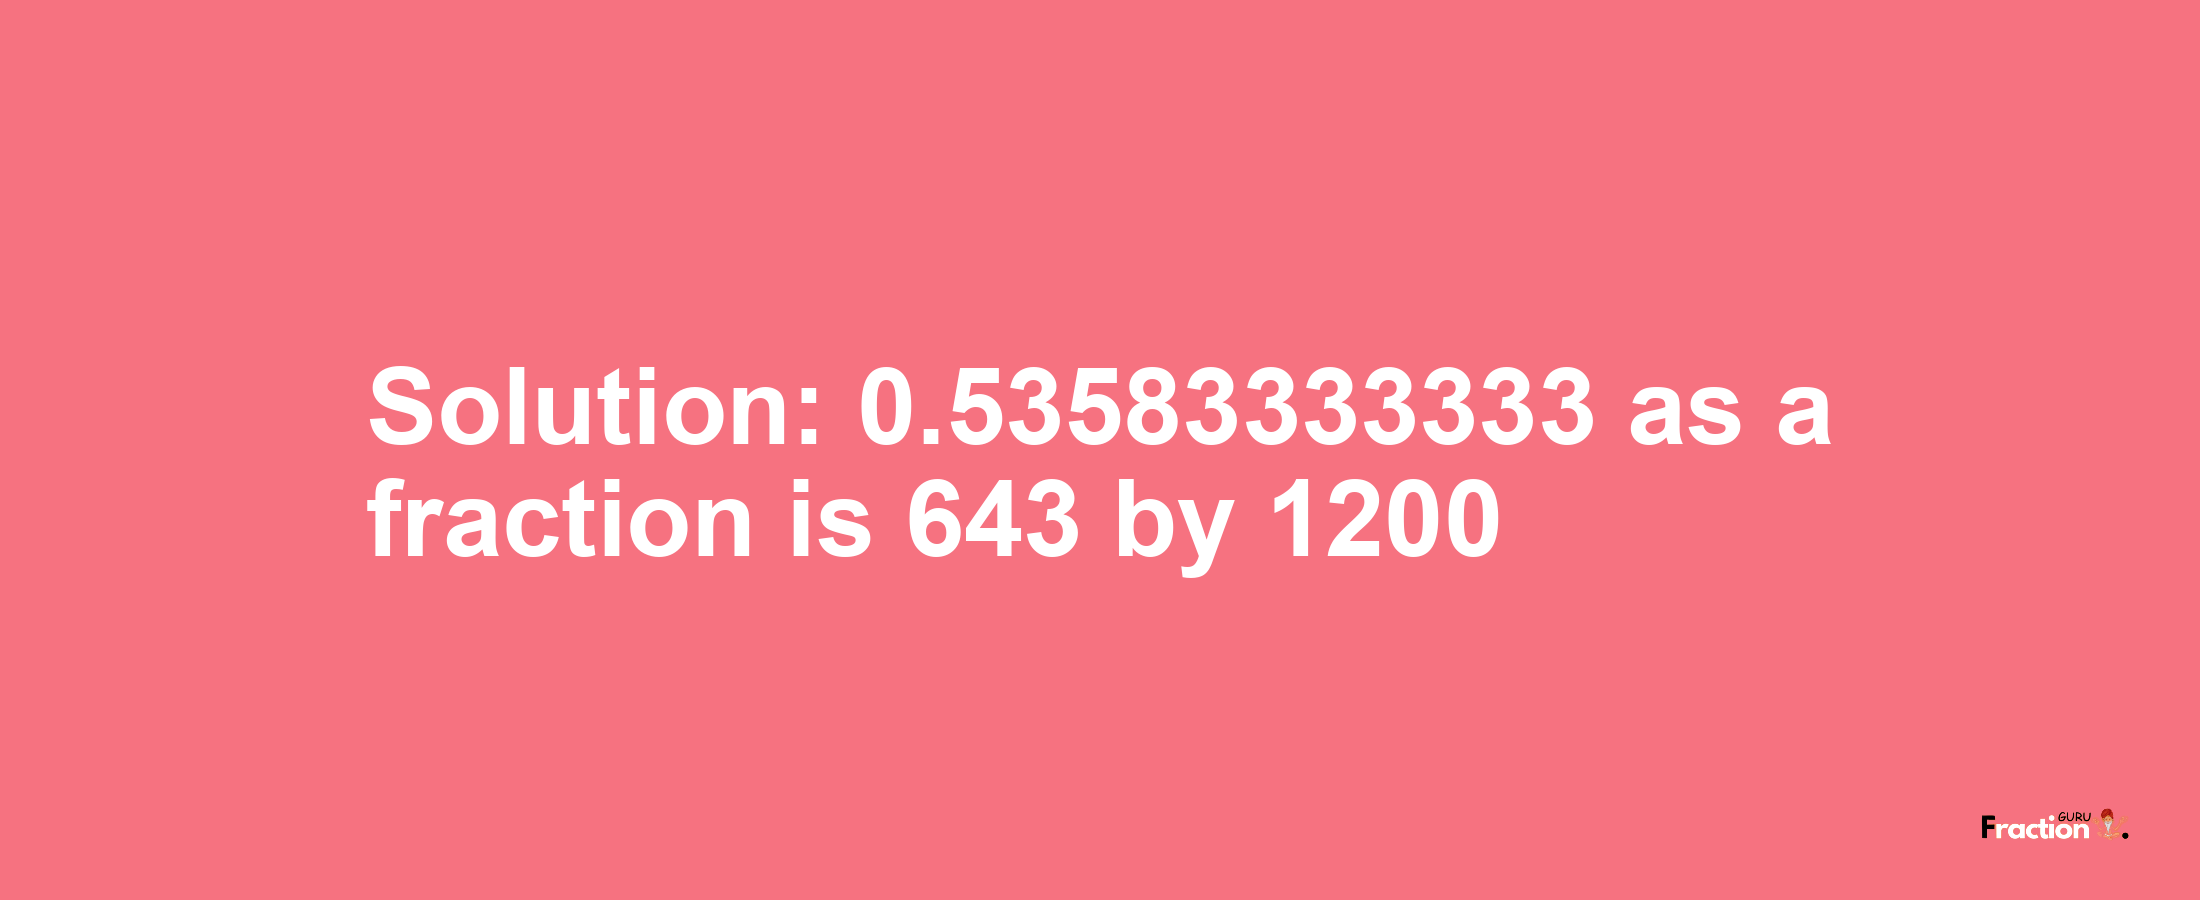 Solution:0.53583333333 as a fraction is 643/1200